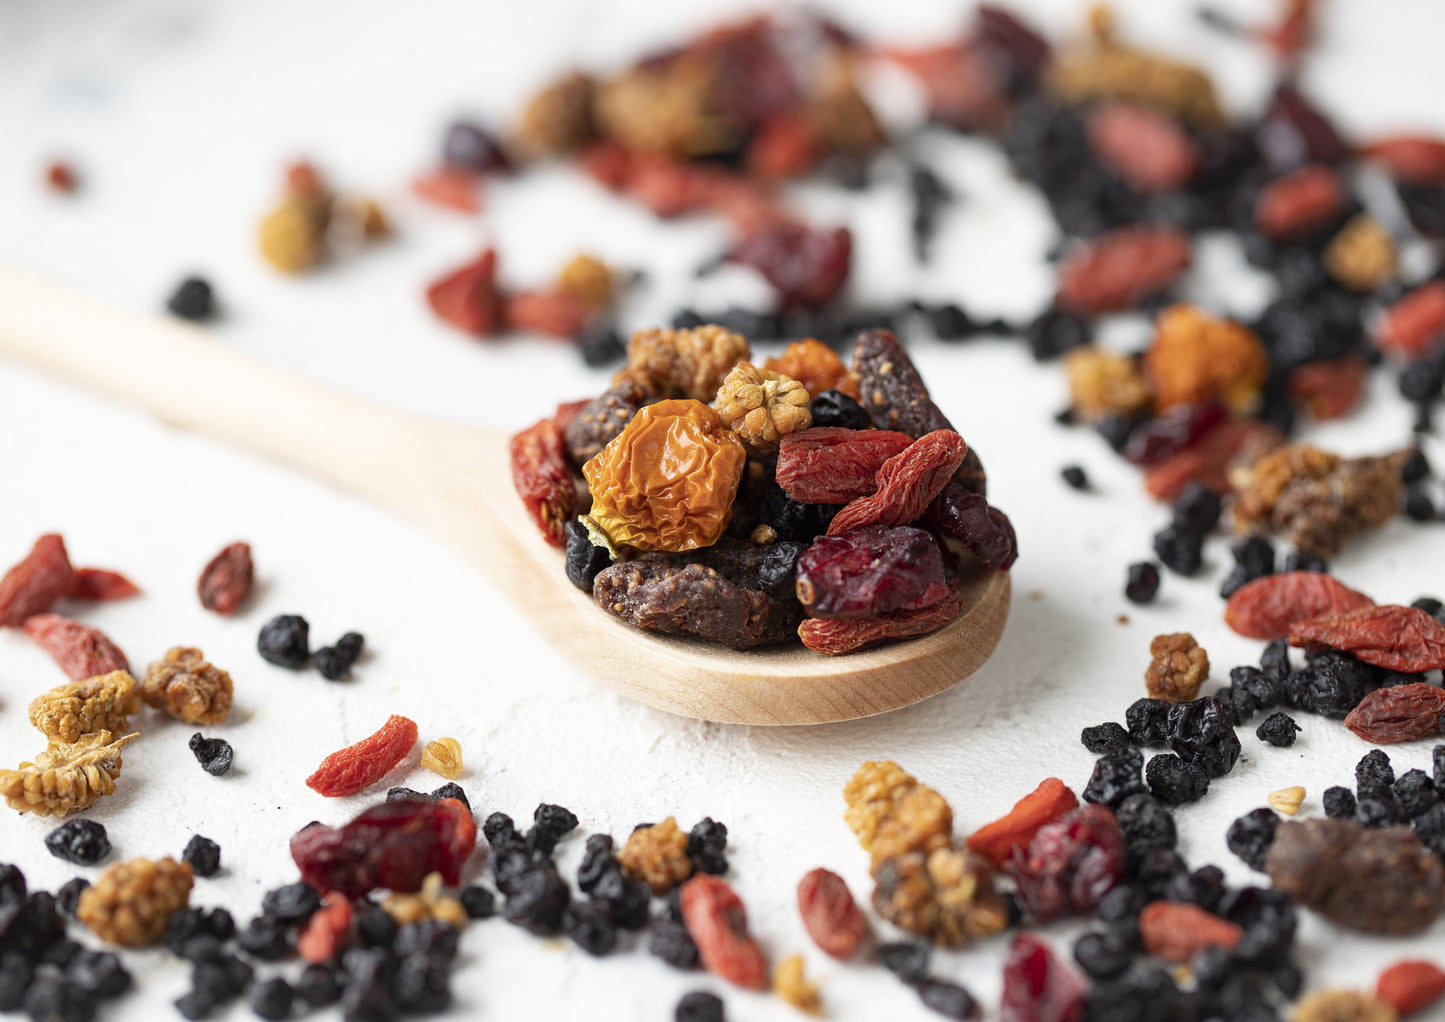 Organic Berries Paradise Mix – A Blend of Non-GMO Dried Cranberries, Blueberries, Strawberries, Elderberries, Goji Berries, Golden Berries, Mulberries. Great Snack. Add to Granola, Yogurt